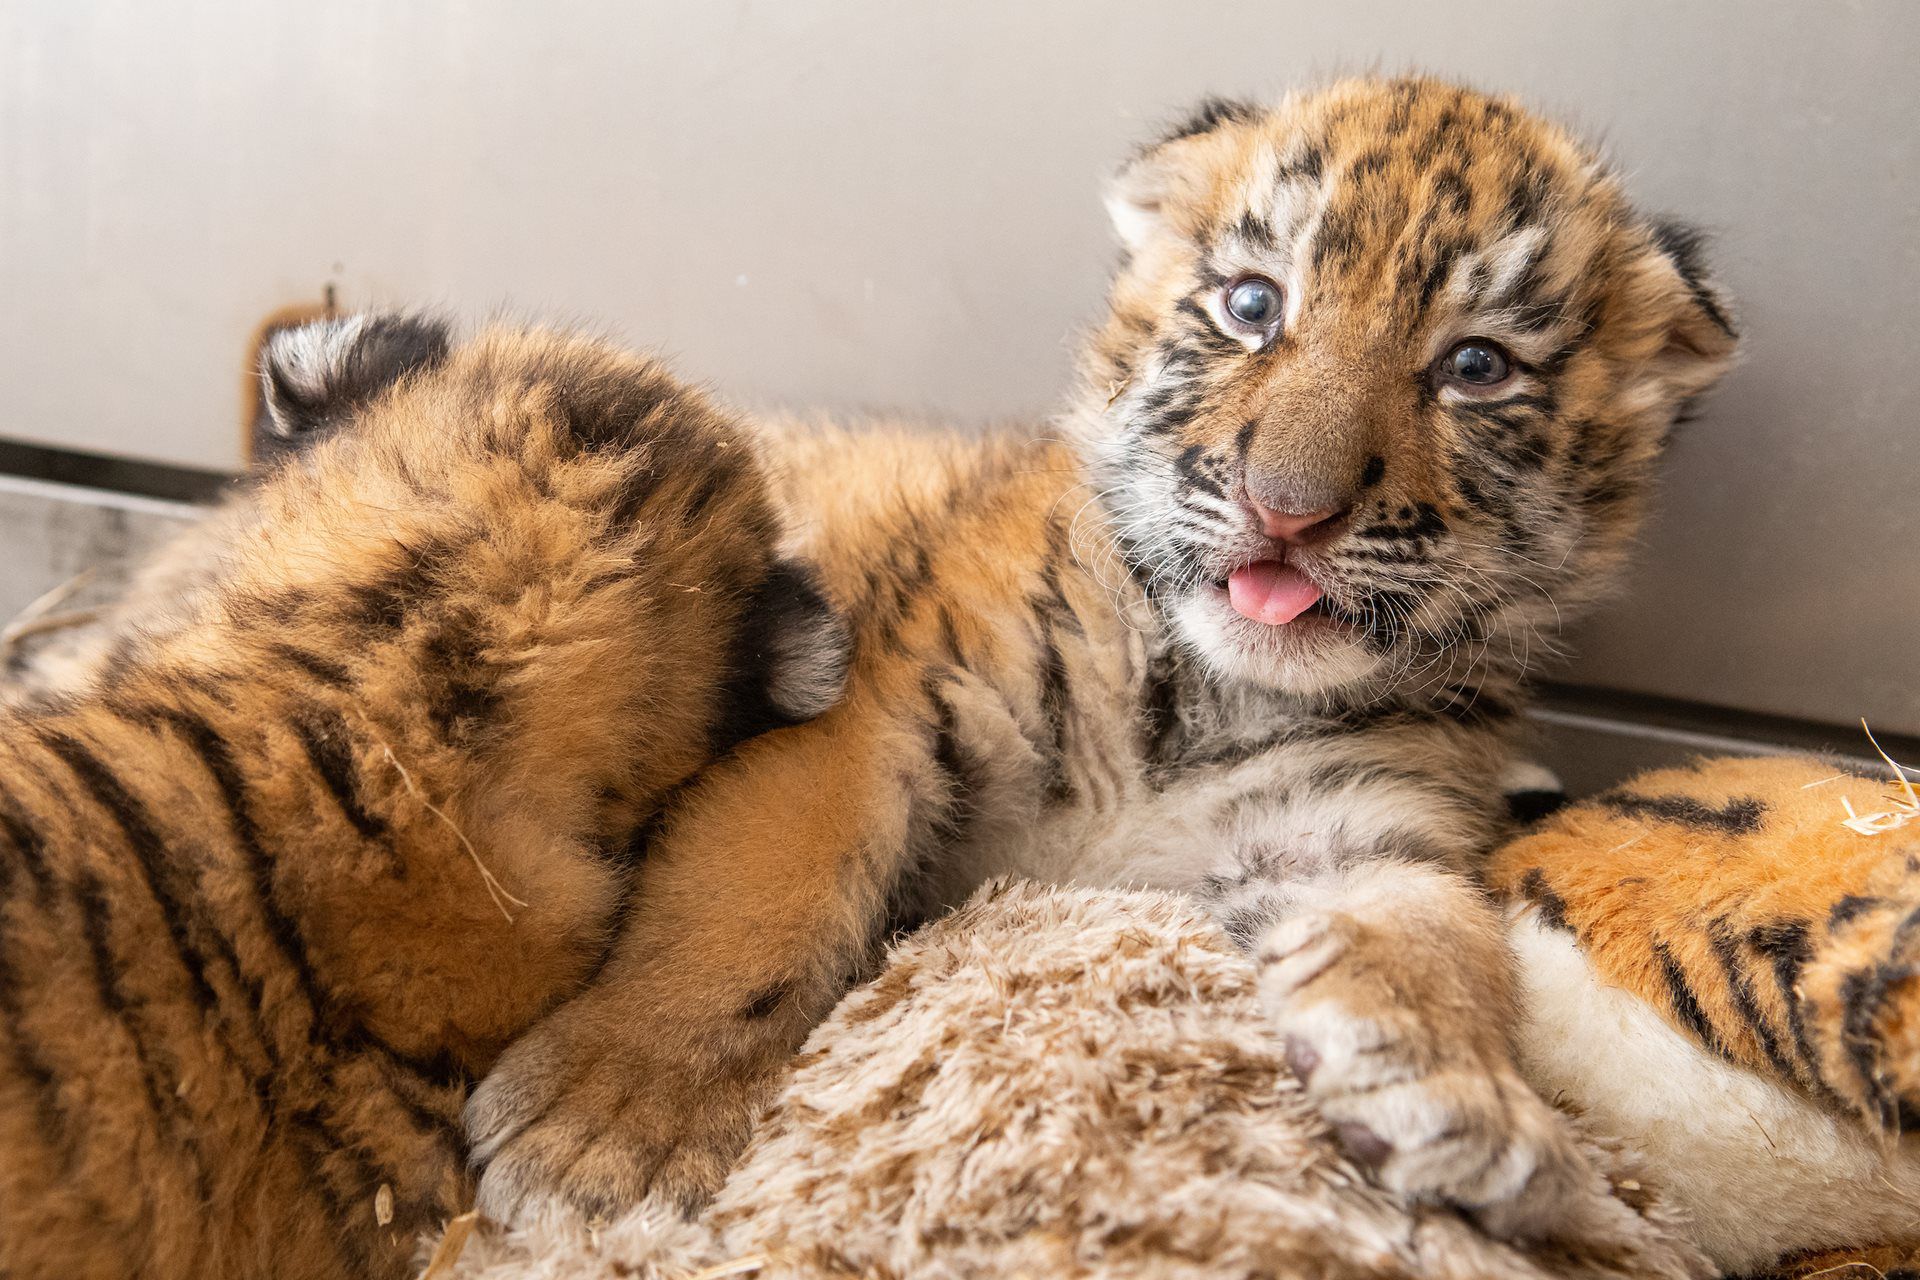 Memphis Zoo welcomes 2 tiger cubs. Take a look at the babies